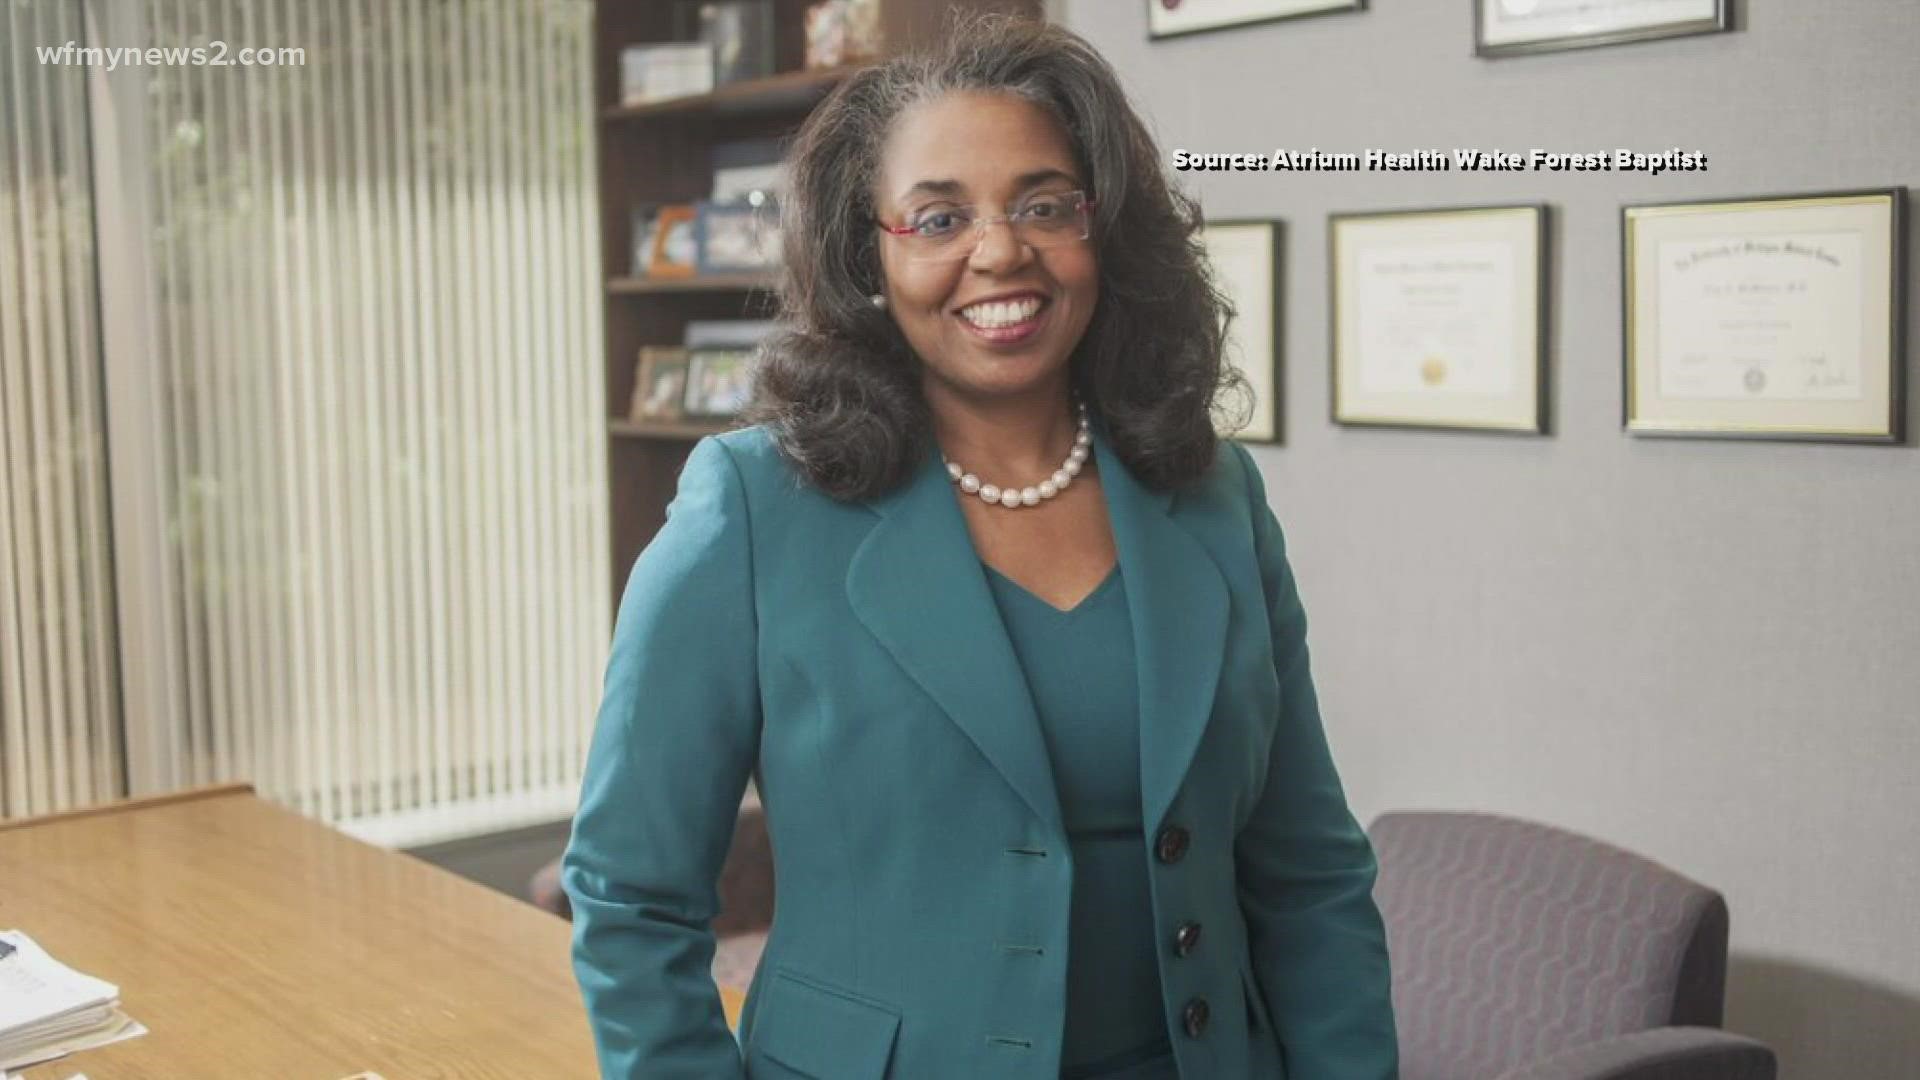 Dr. Amy McMichael is the first black female chair at Atrium Health Wake Forest Baptist, and the first black female chair of dermatology in the United States.